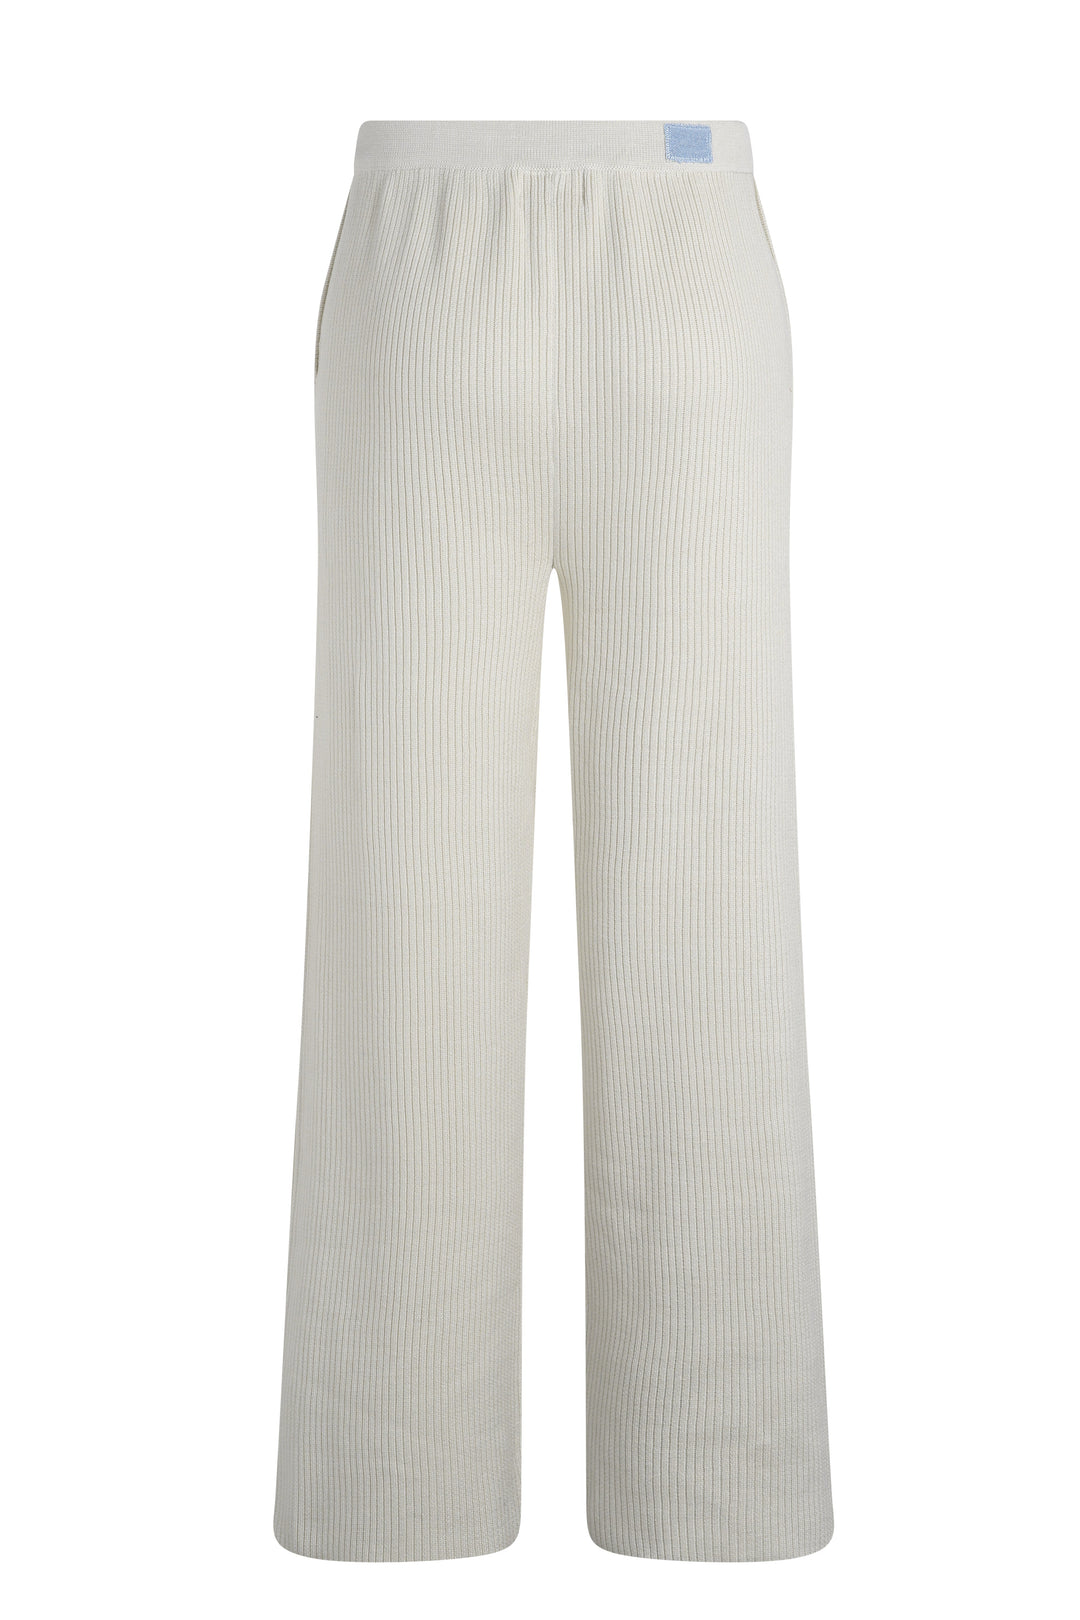 The Knitted Ribbed Pants - Oat